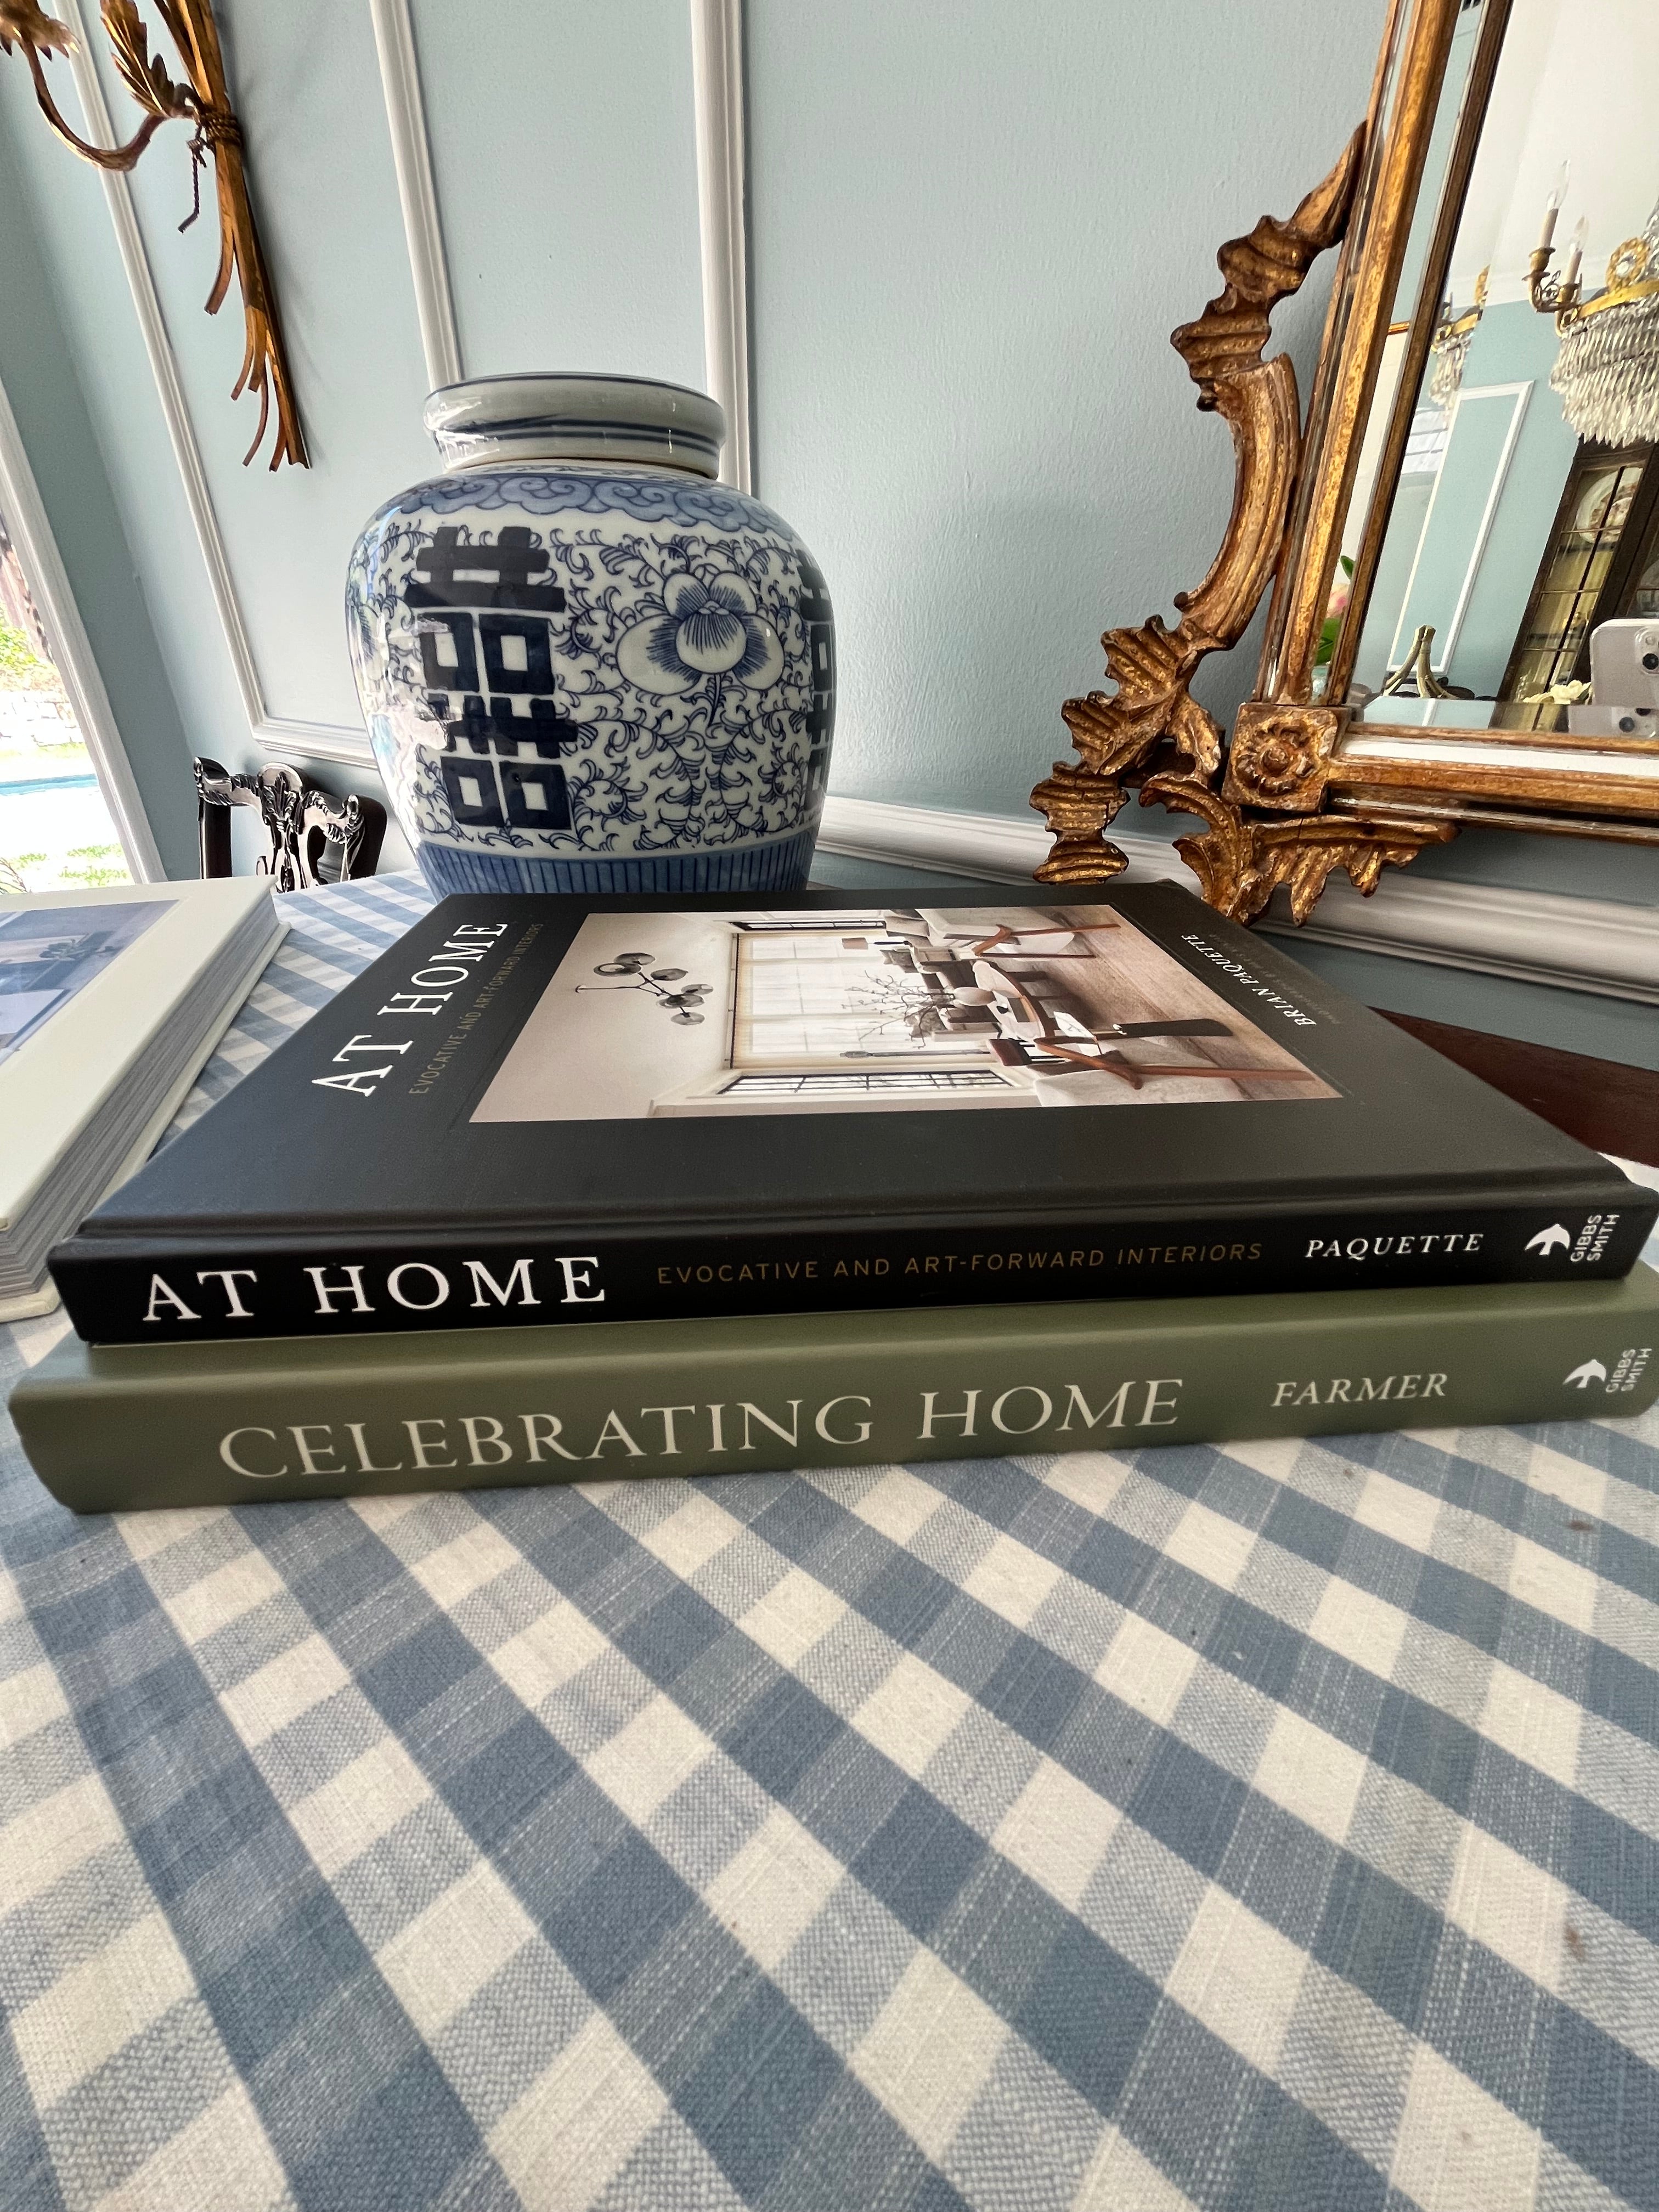 “At Home:  Evocative & Art-Forward Interiors” by Brian Paquette